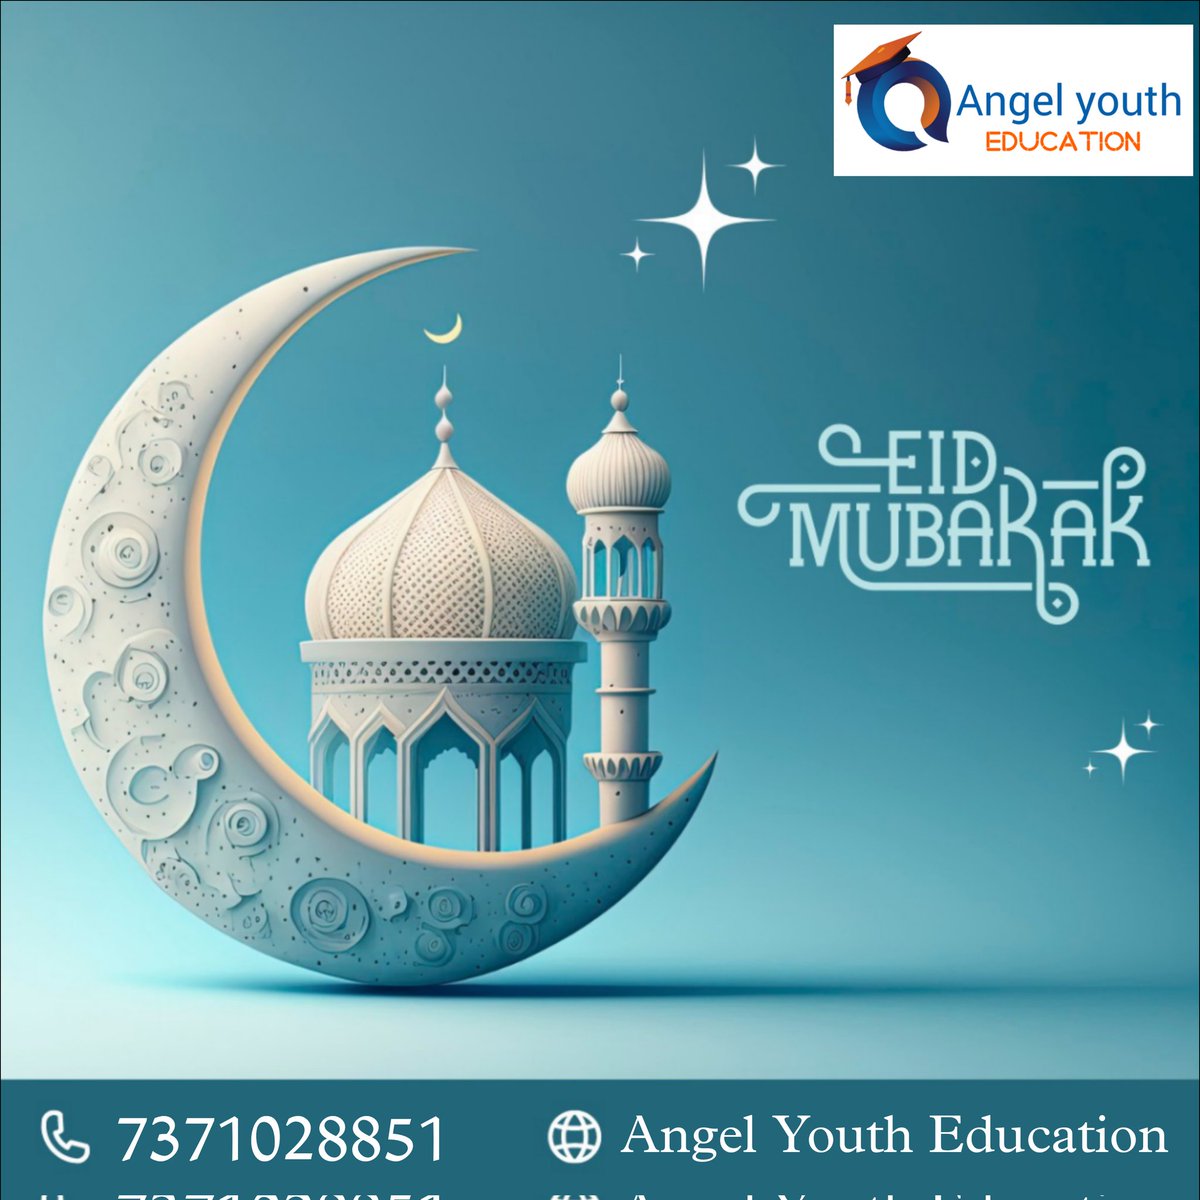 #EidMubarak Wishing everyone a very happy and blissful Eid! May this occasion bring good health, prosperity and happiness to all. #EidMubarak #Eid2024